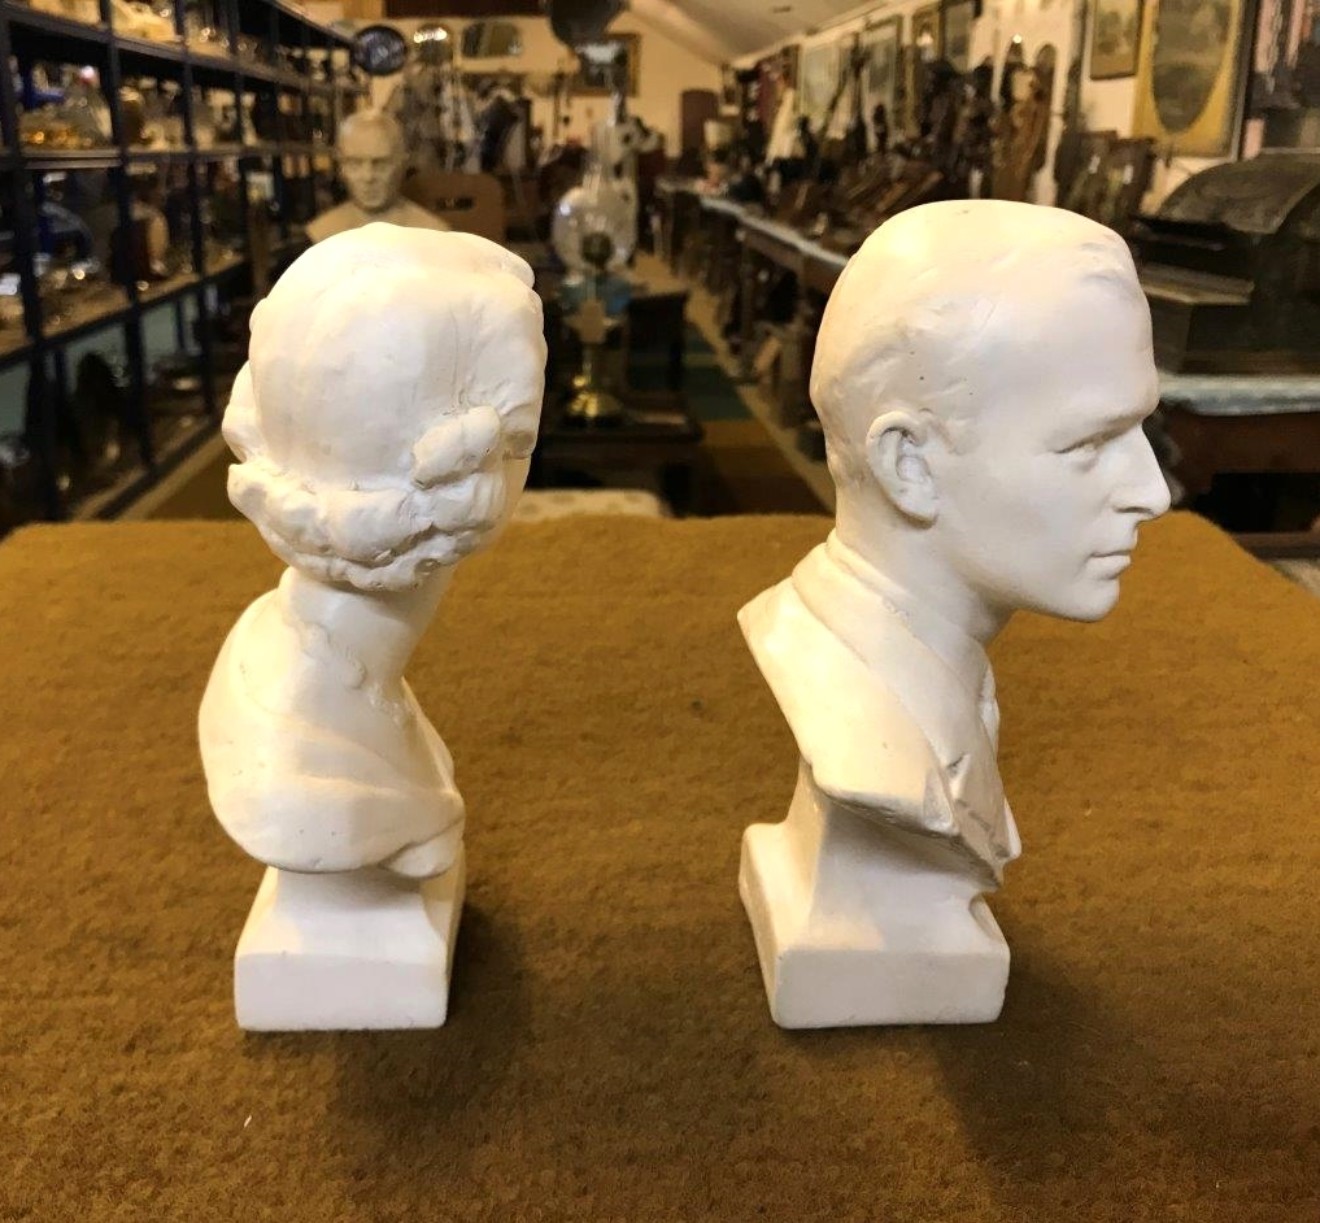 Plaster Busts Queen Elizabeth II and The Duke of Edinburgh Created for the Coronation 1953